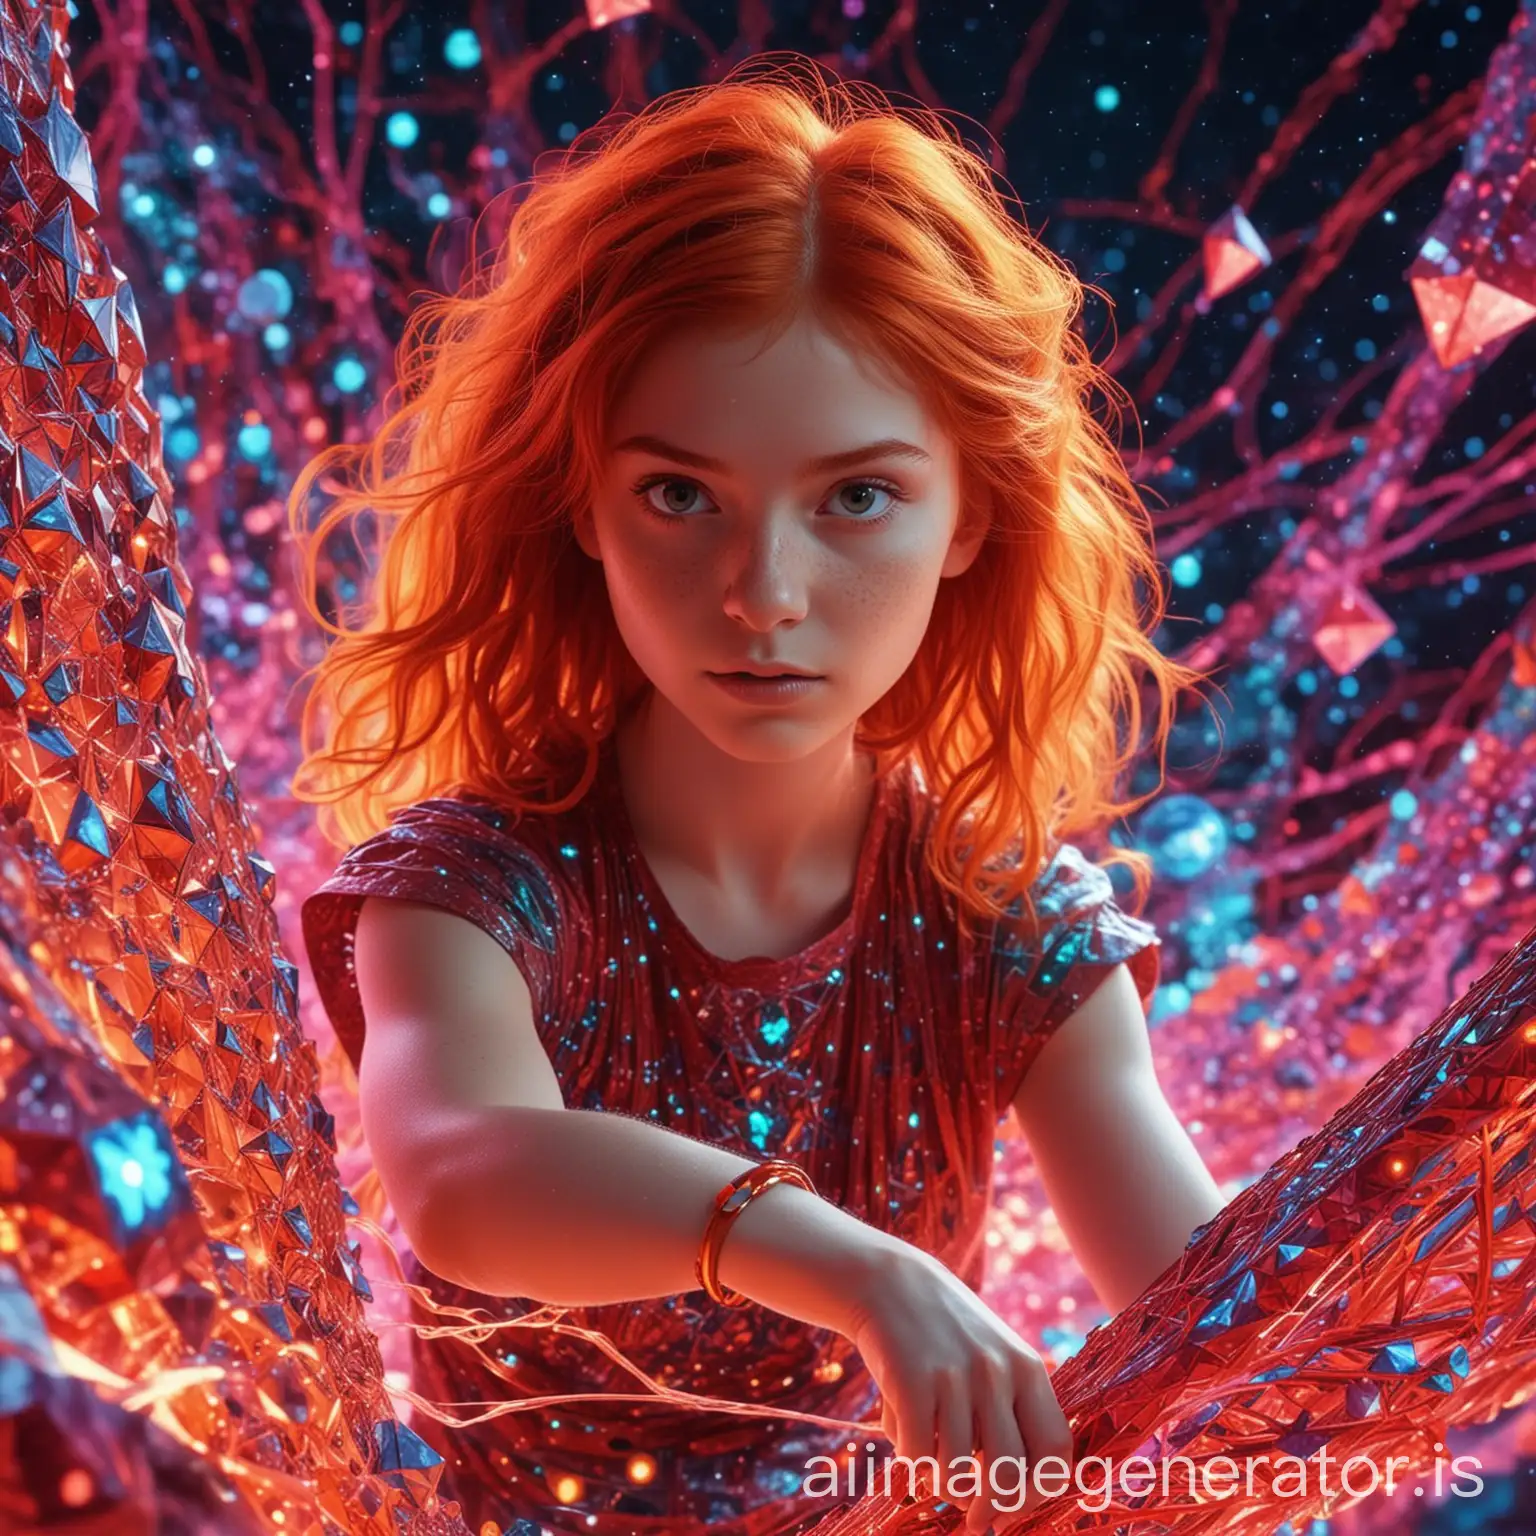 Close-up of a red-haired girl saving the world by playing the sikuri. Psychedelic background of fluorescent fractals.